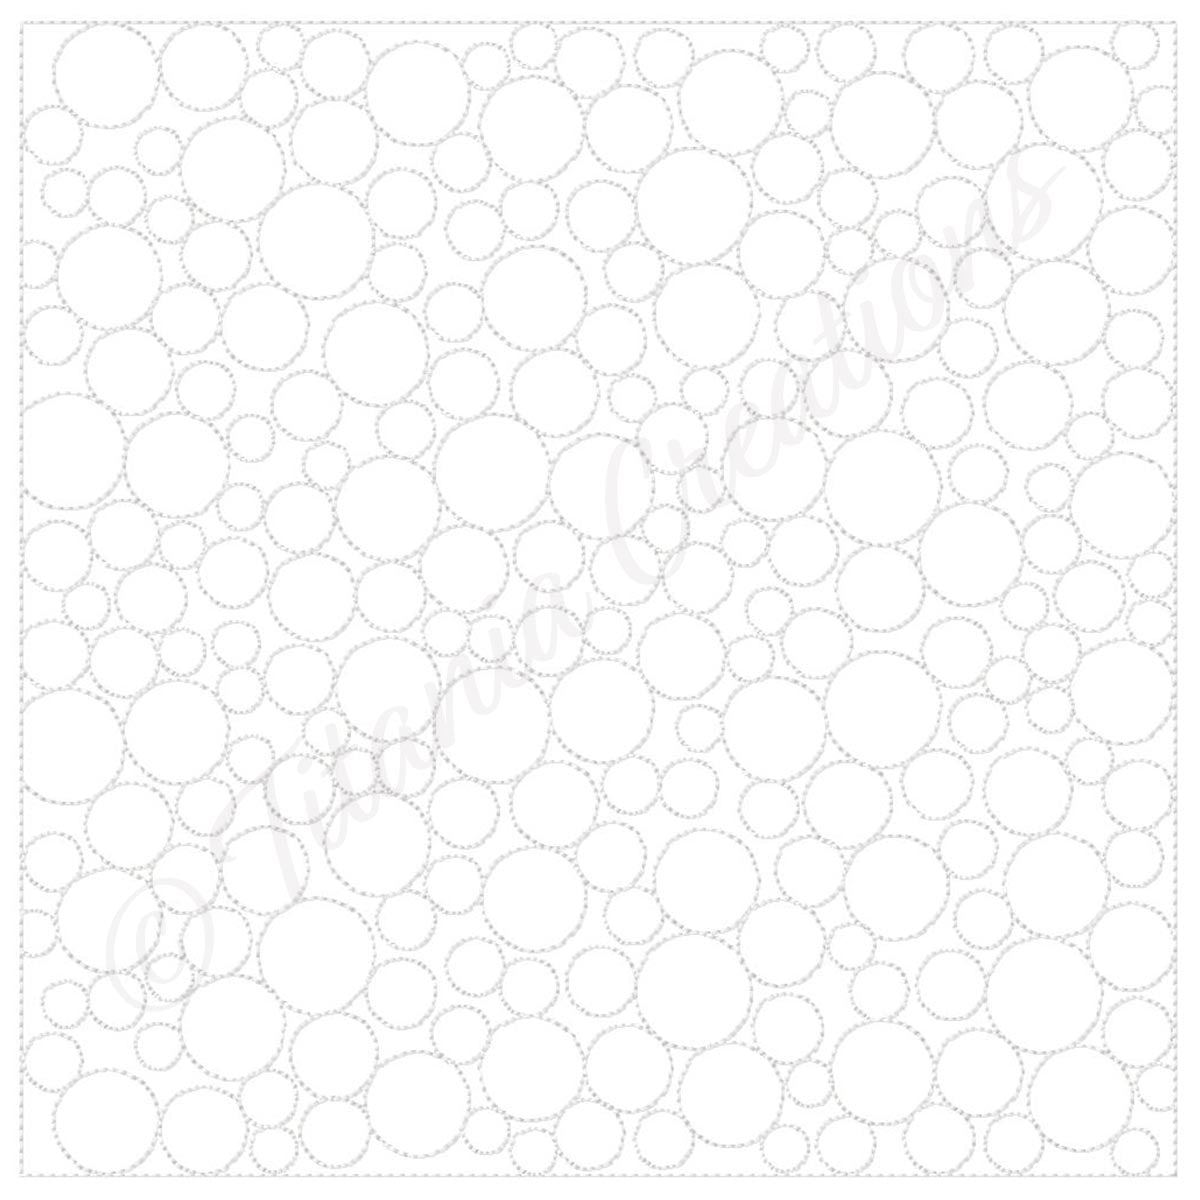 Bubble Quilt Blocks 9 Sizes Included